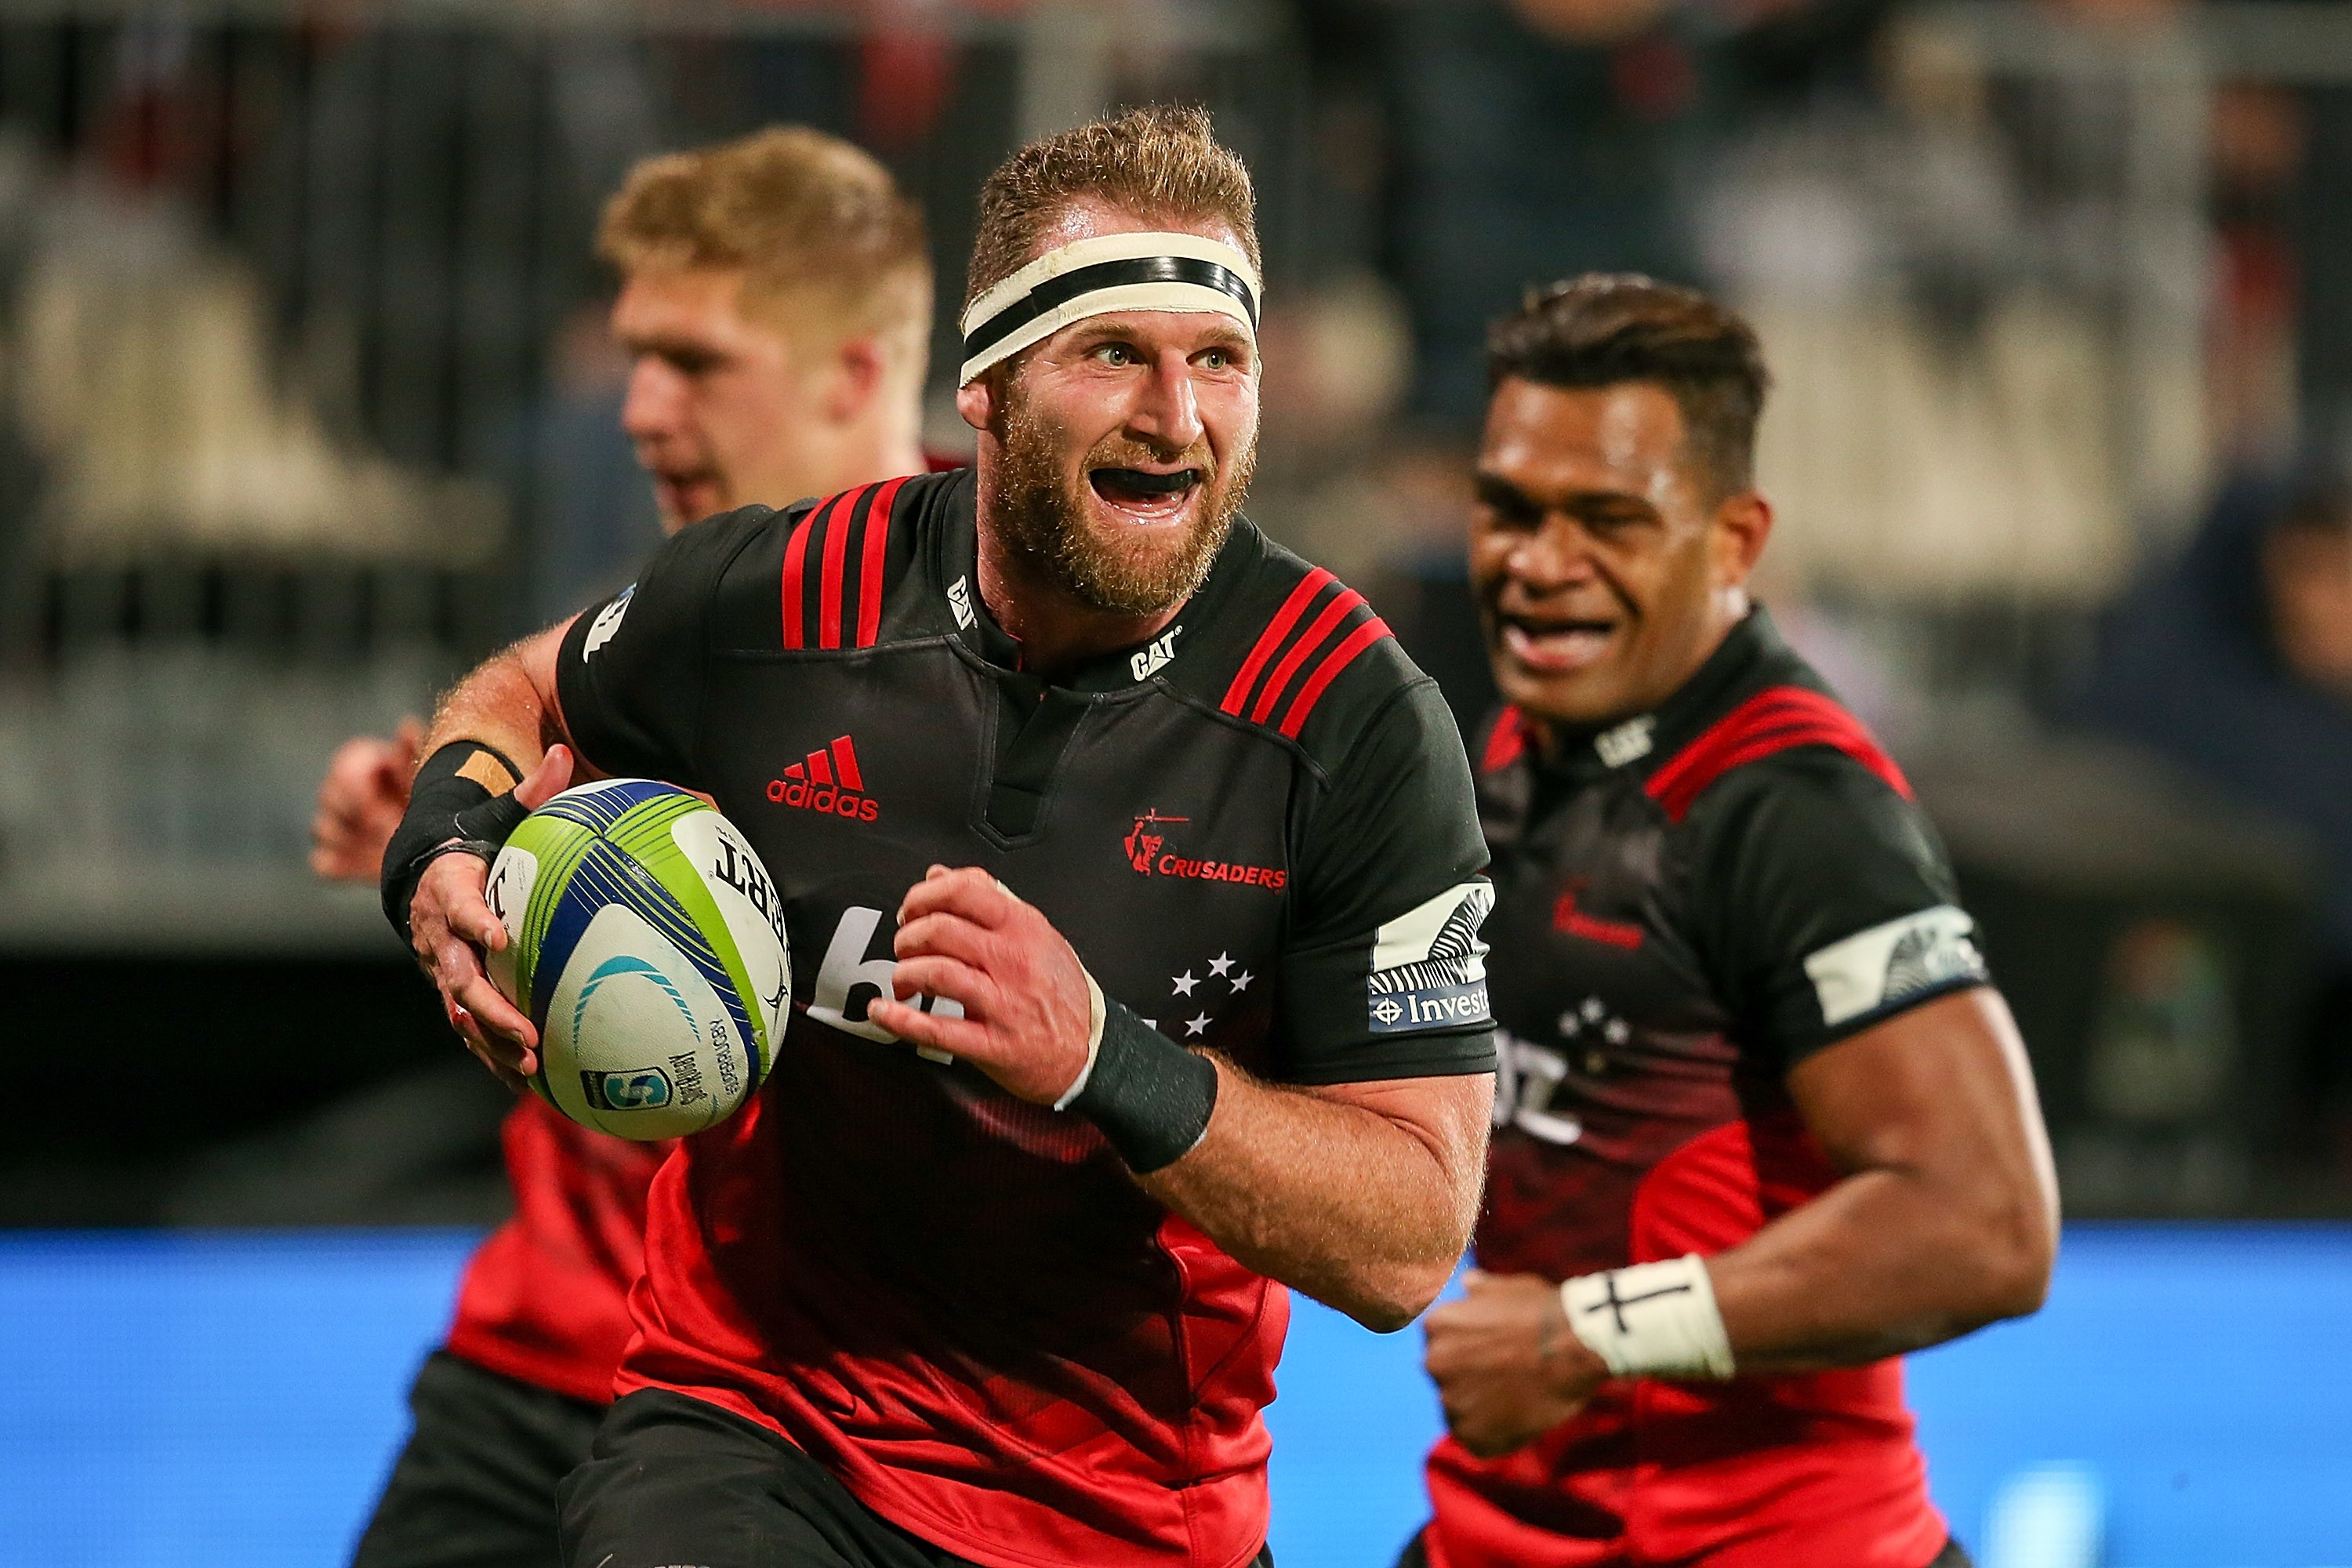 Kieran Read of the Canterbury Crusaders scores a try during the Super Rugby match against South Africa’s Western Stormers. Photo: AFP